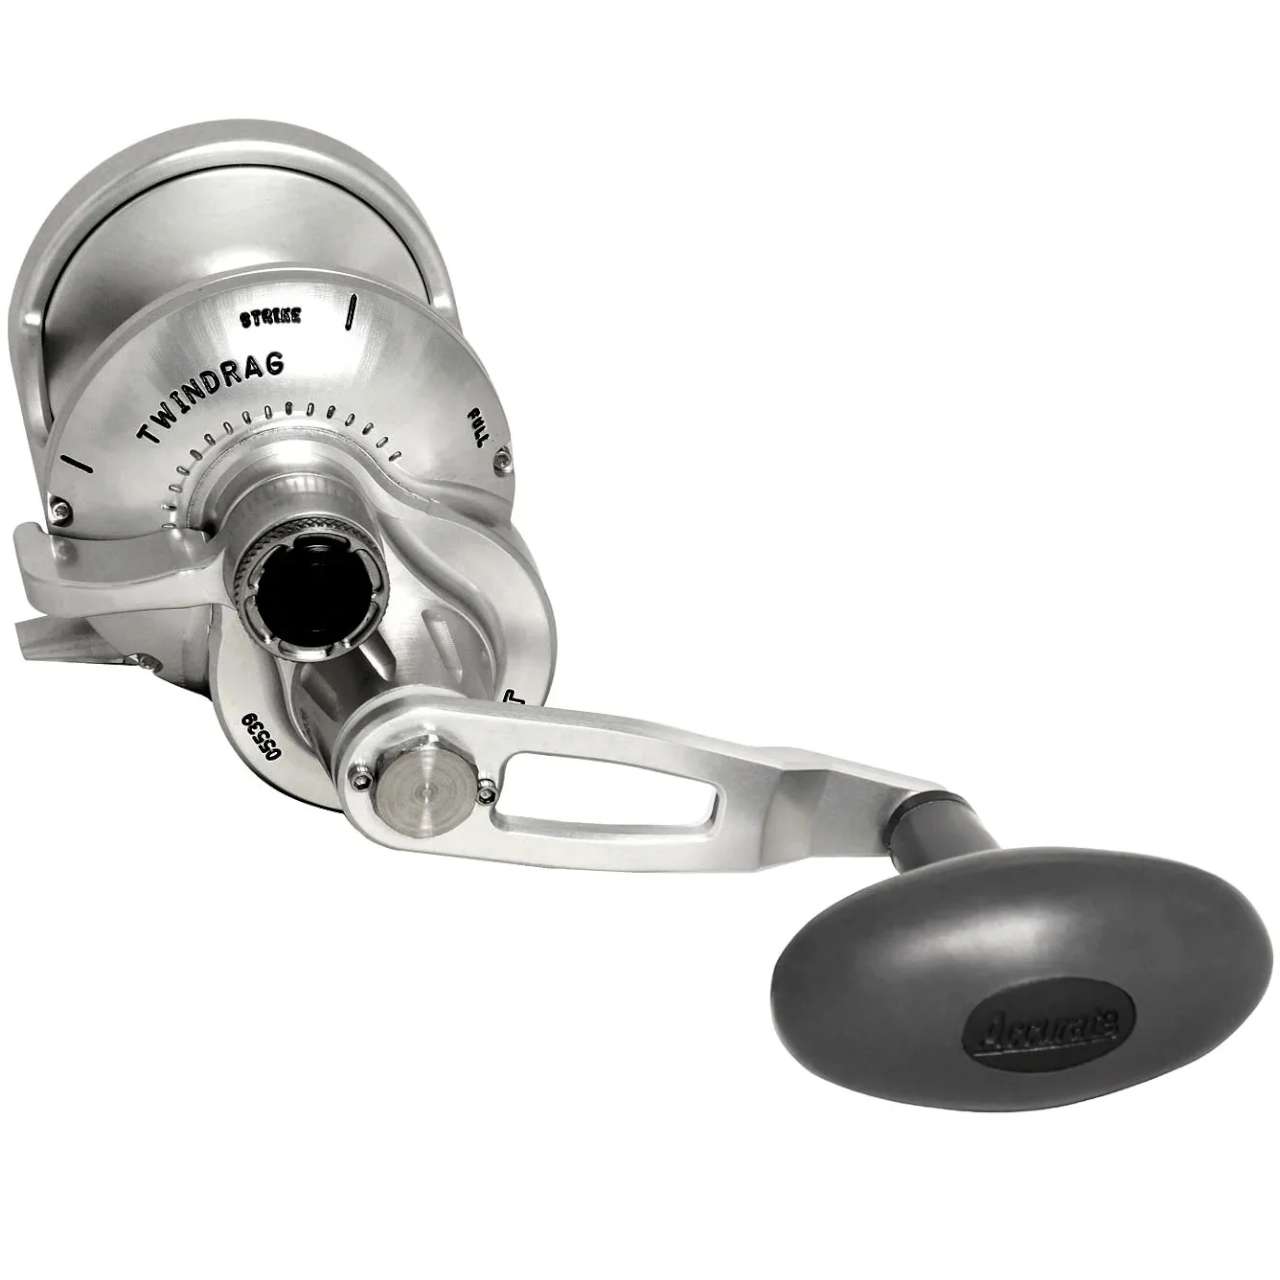 ACCURATE FISHING REEL - Conventional W/Power handle for